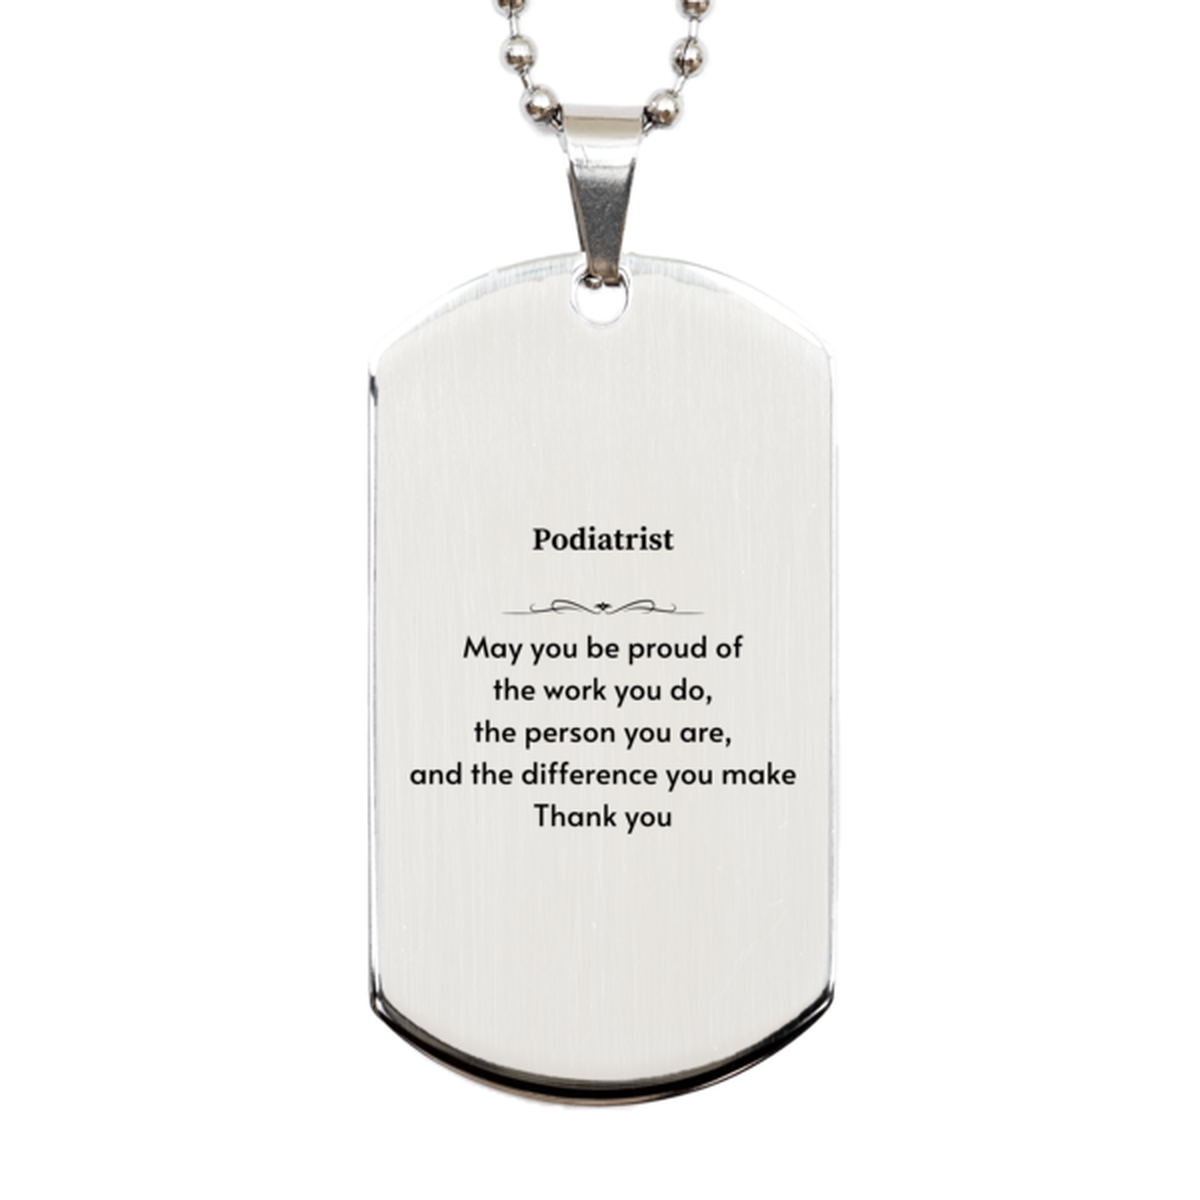 Heartwarming Silver Dog Tag Retirement Coworkers Gifts for Podiatrist, Podiatrist May You be proud of the work you do, the person you are Gifts for Boss Men Women Friends